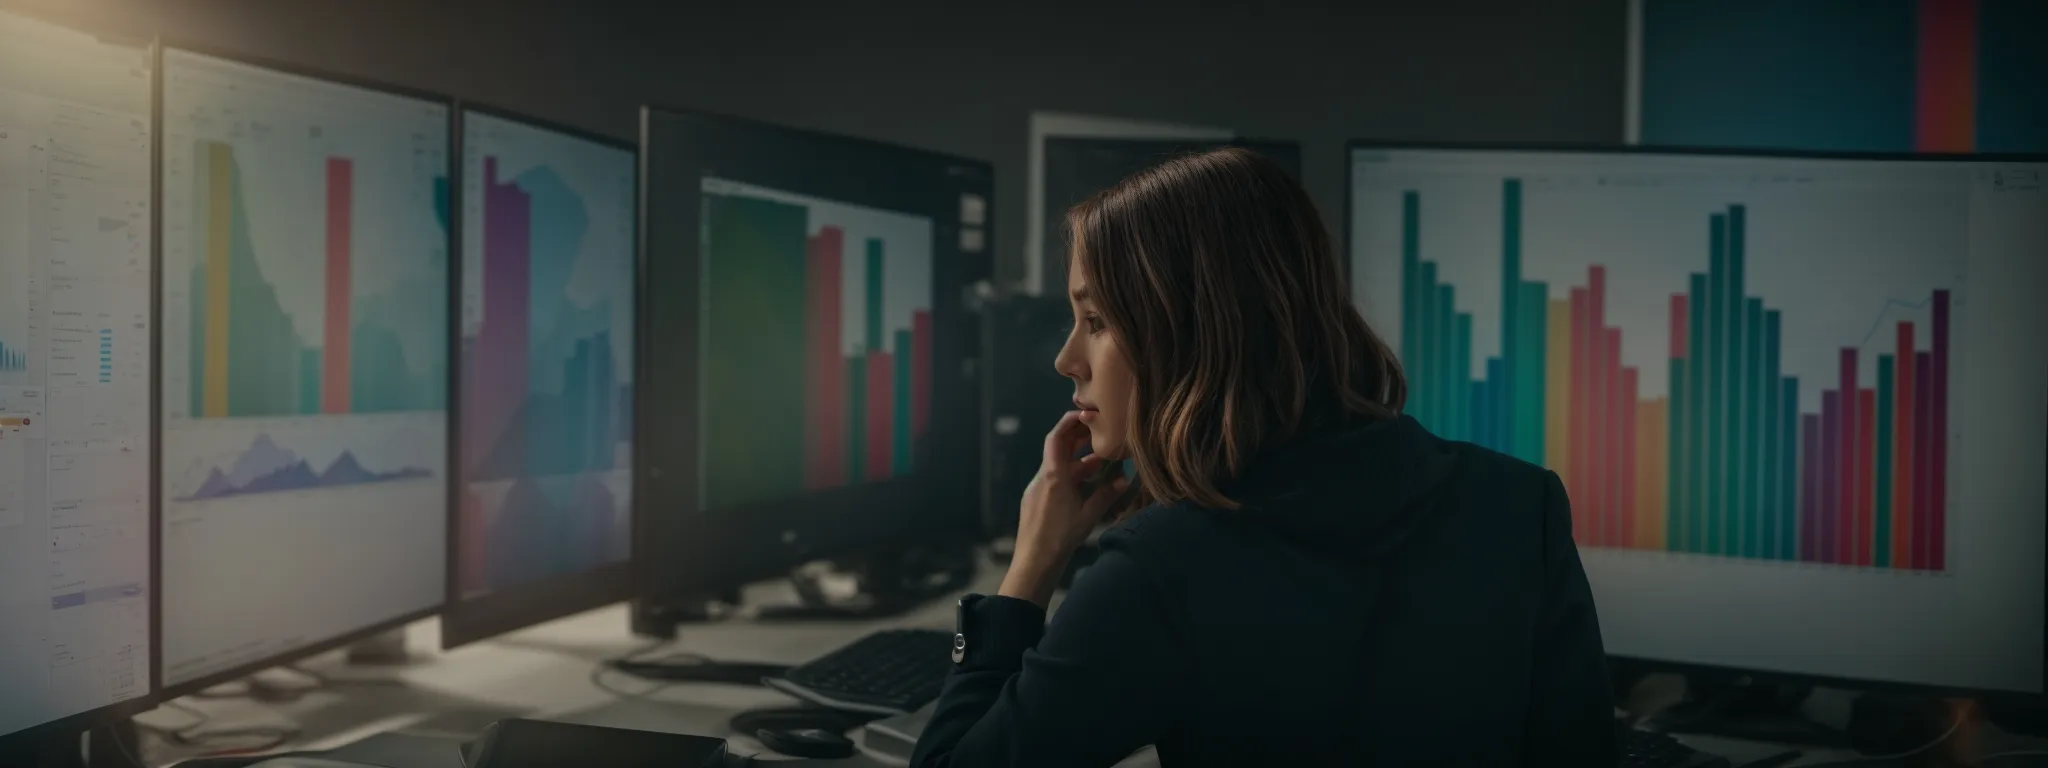 a woman thoughtfully analyzes colorful graphs on a large monitor in a modern, bright office setting.